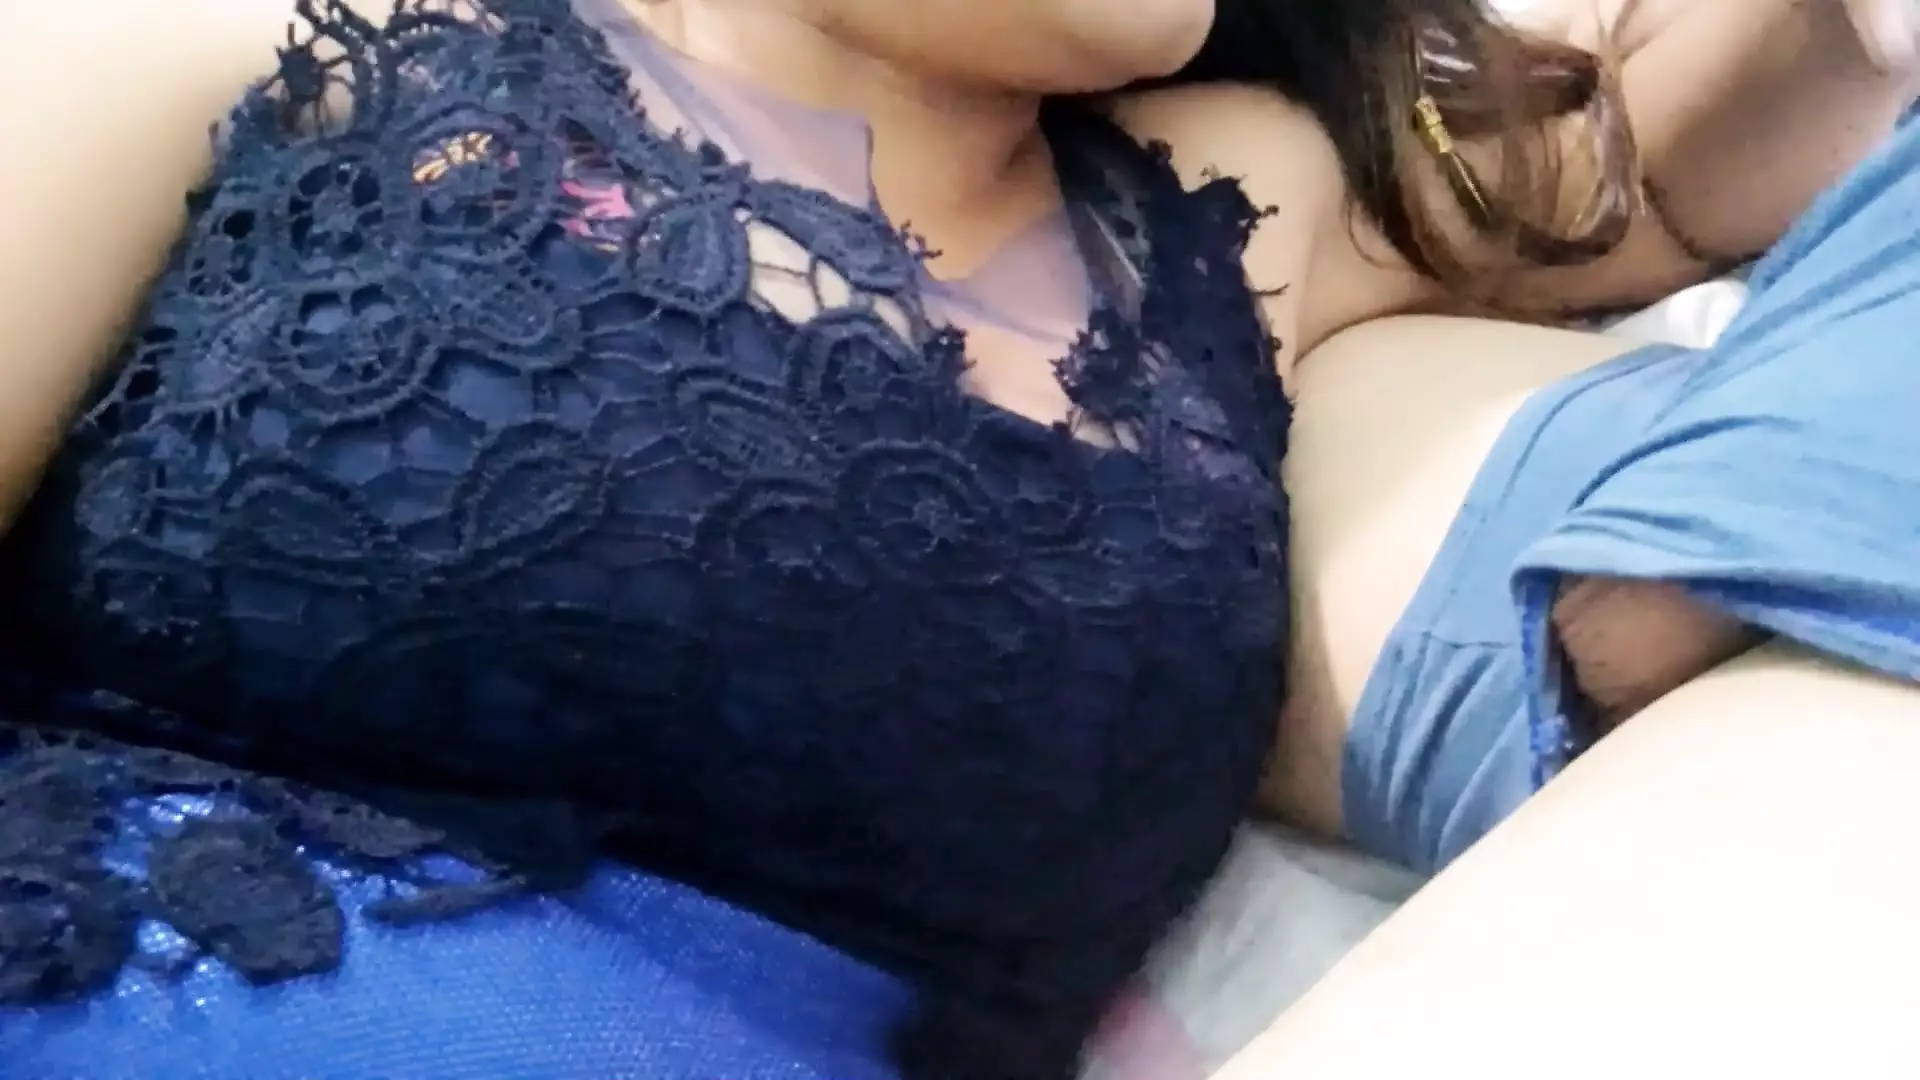 real homemade!! I had a delicious moment next to my stepsister, she gives me a deep blowjob